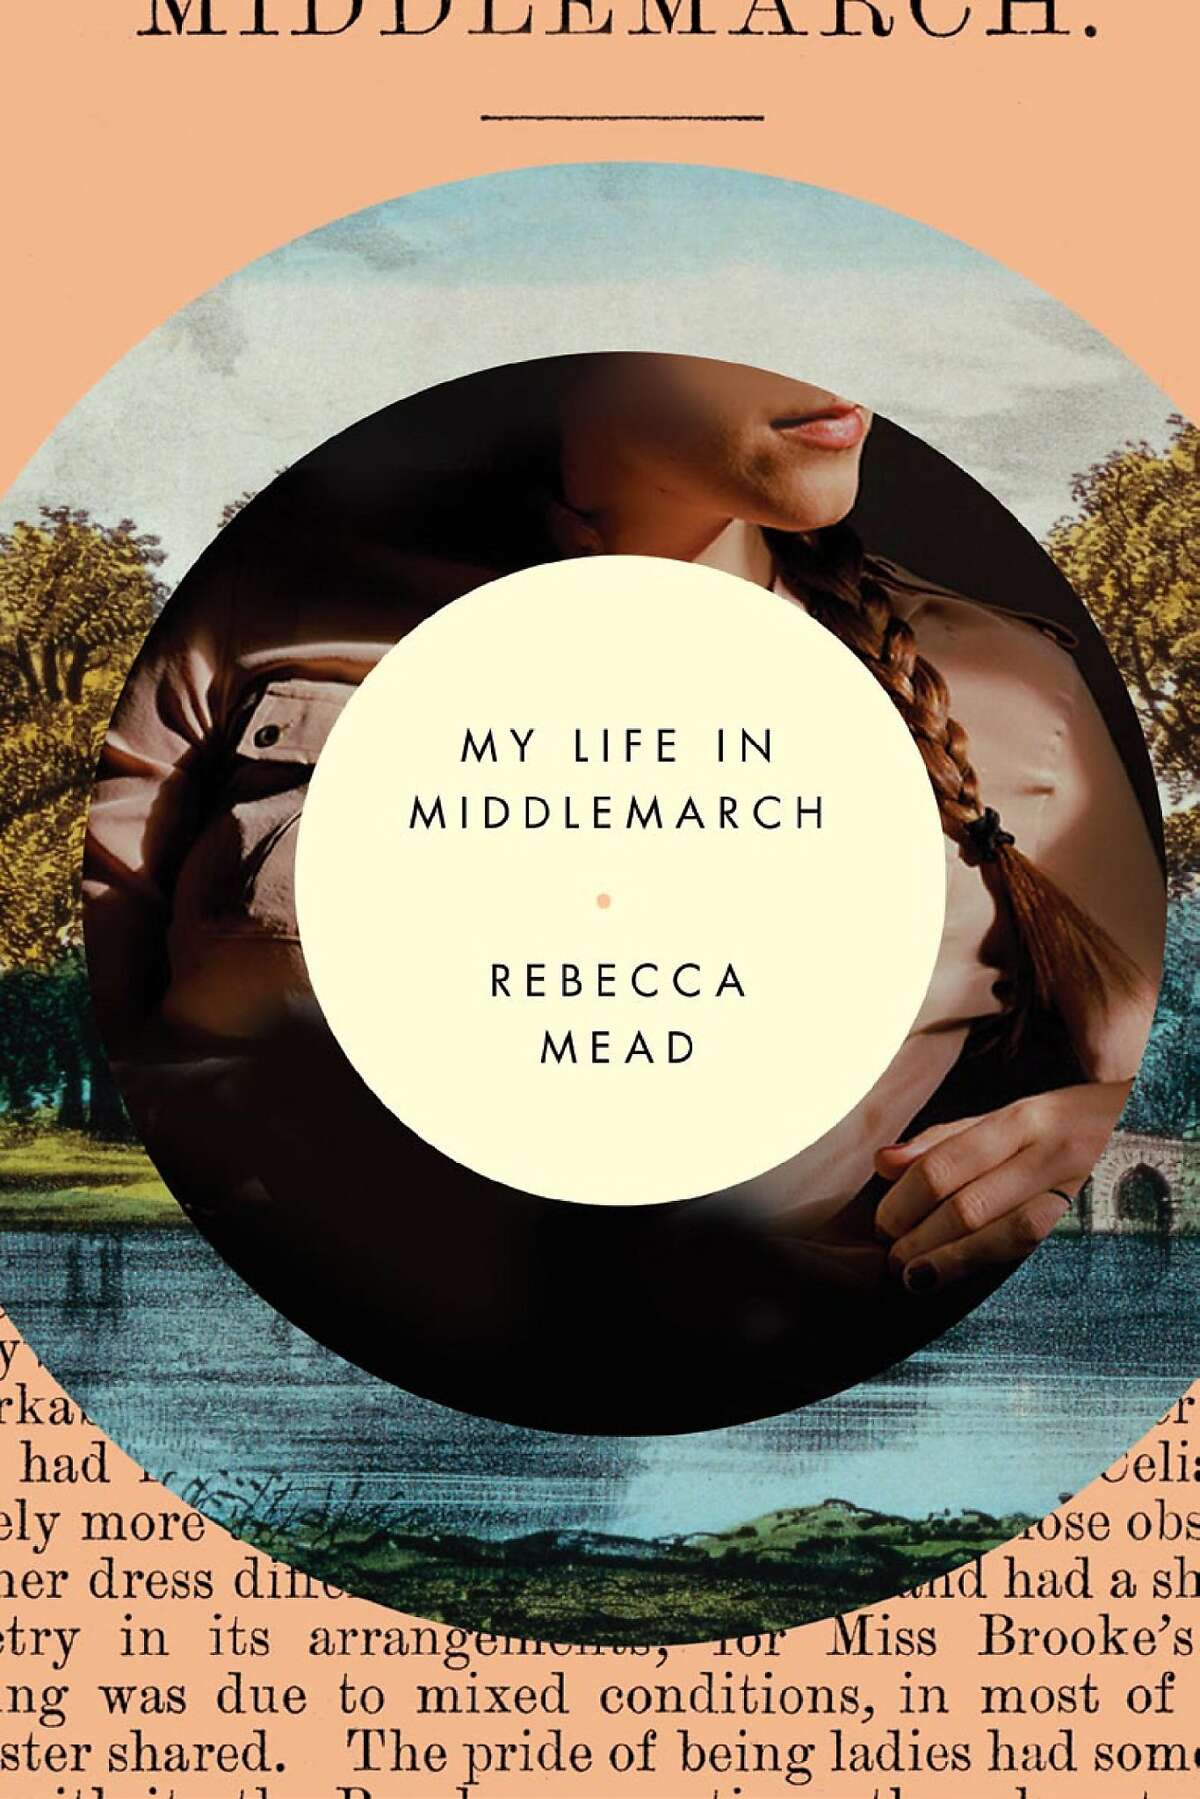 My Life in Middlemarch, by Rebecca Mead